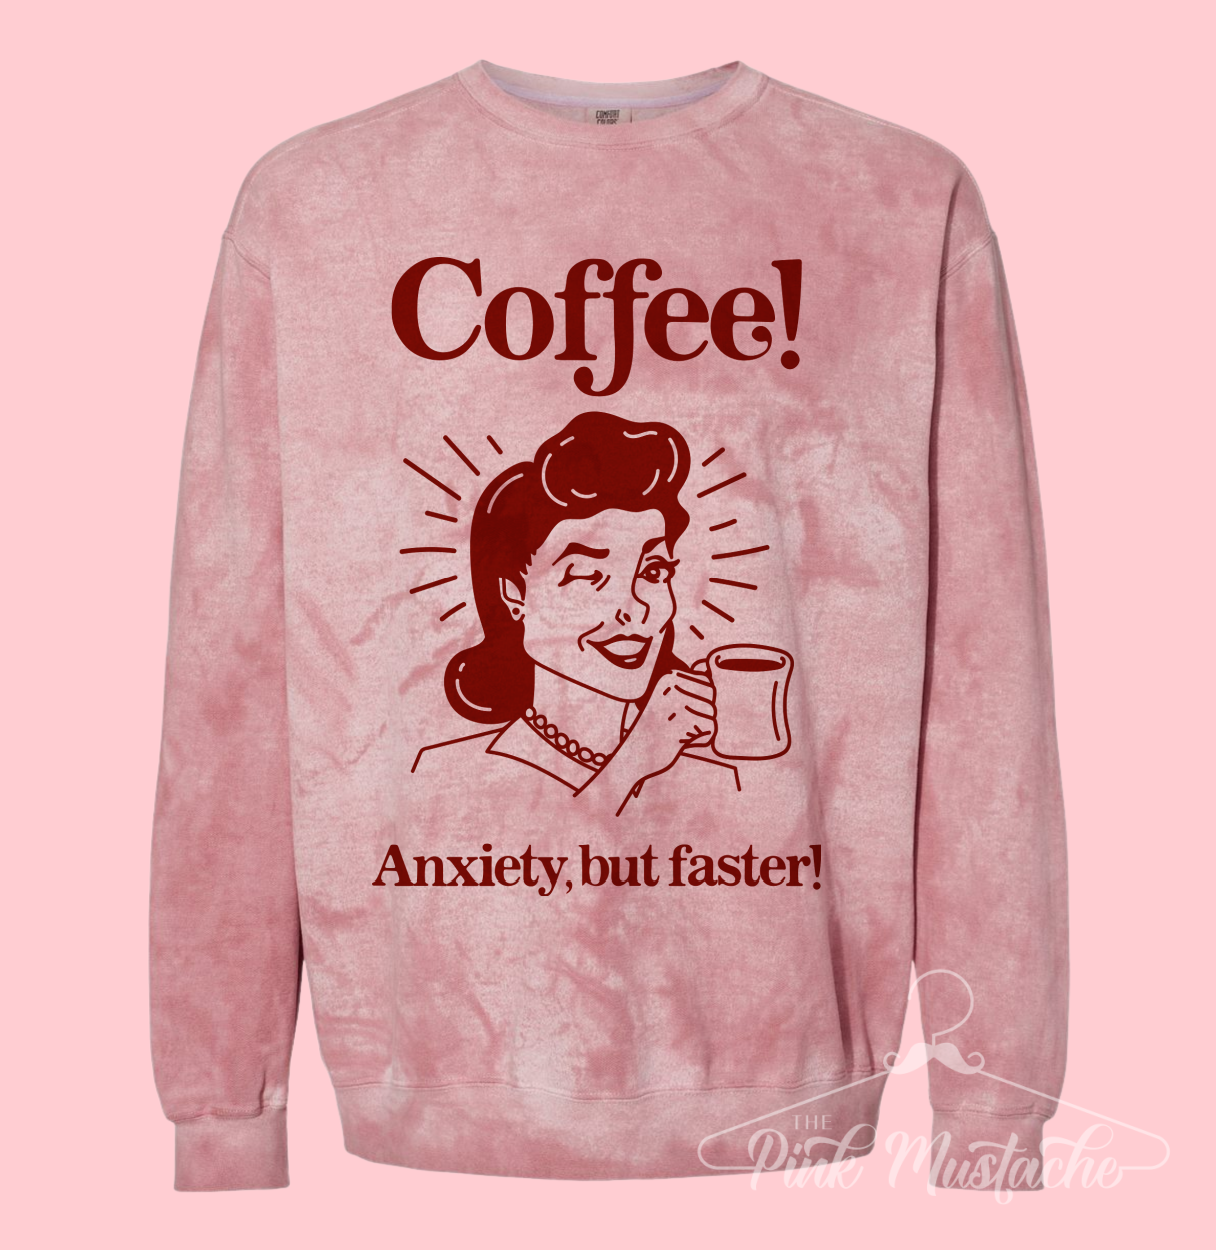 Comfort Colors Colorblast Coffee! Anxiety, But Faster! Sweatshirt - Sizes and Inventory Limited